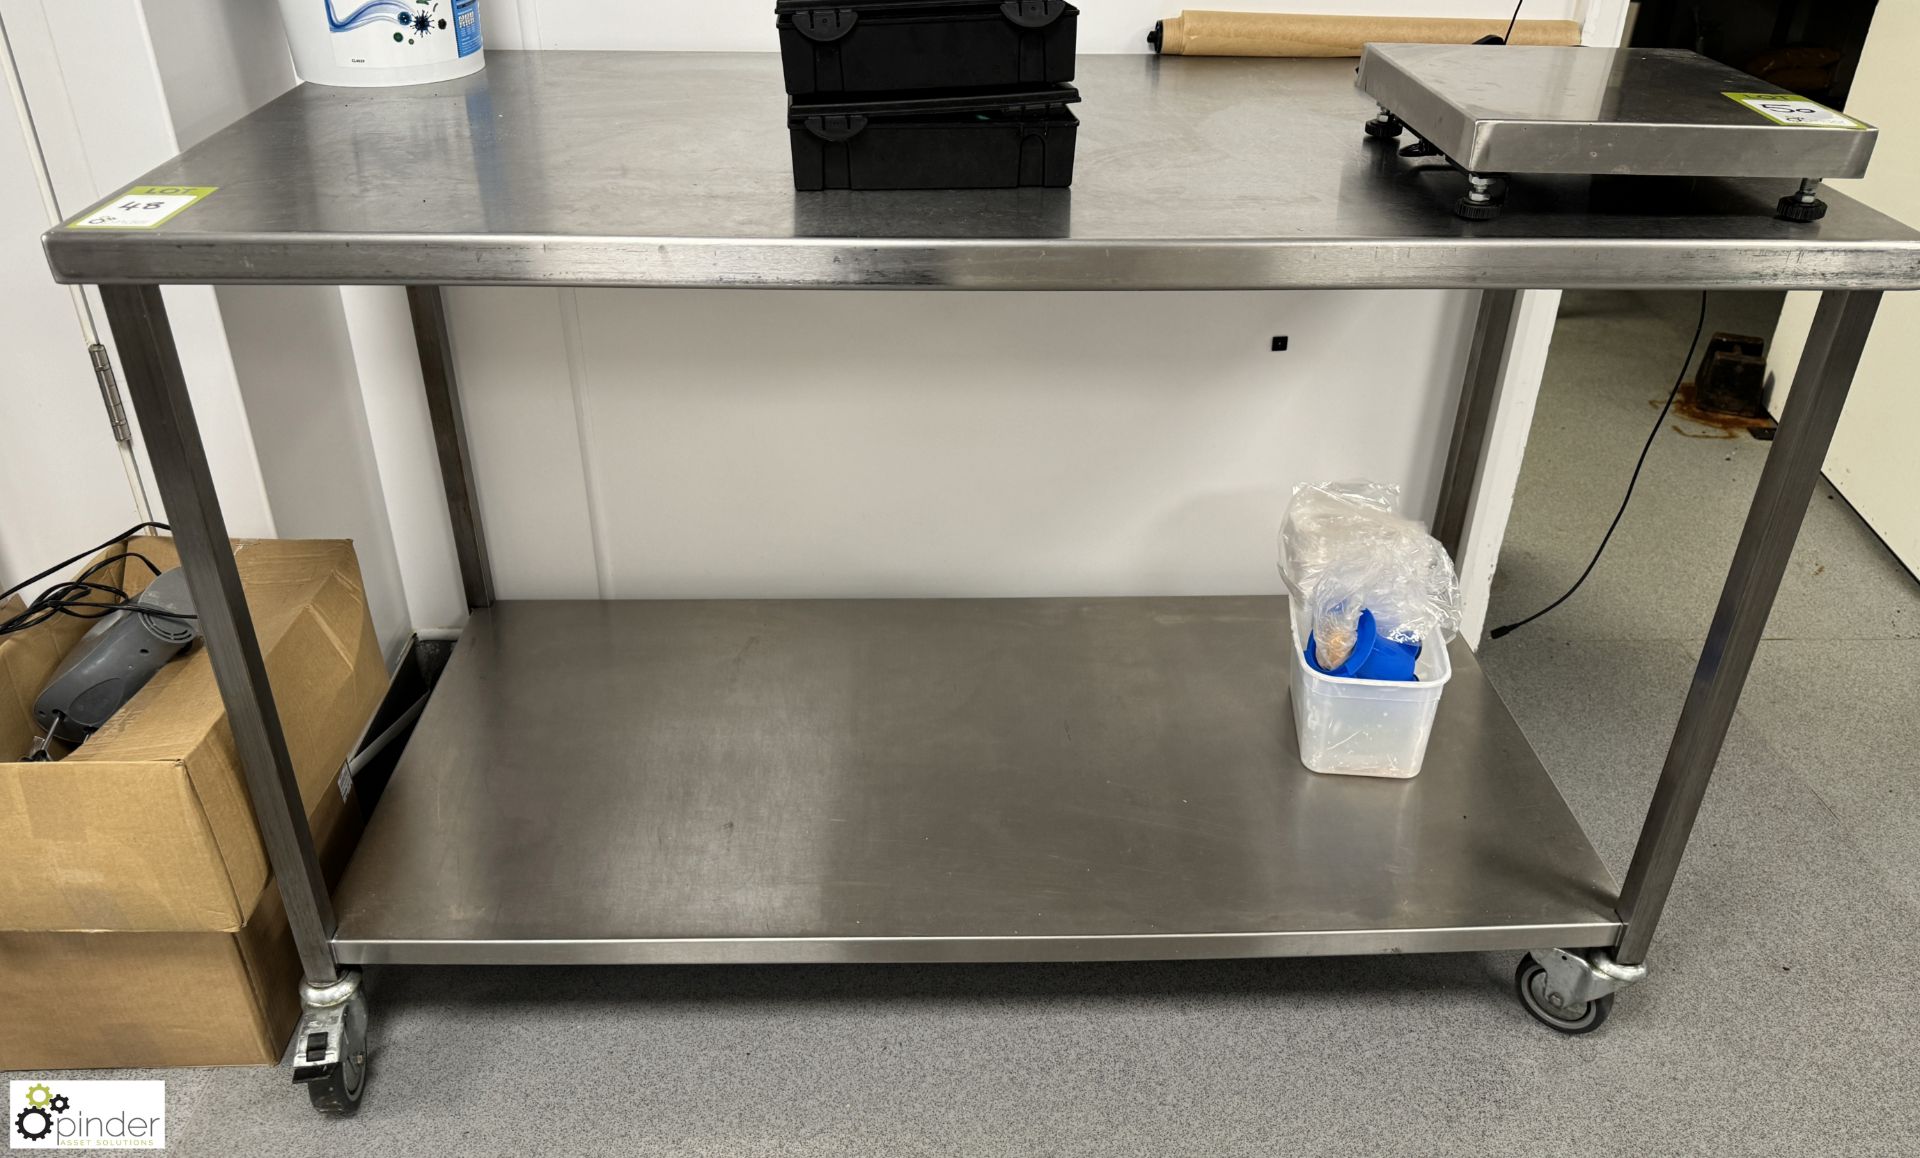 Stainless steel mobile Preparation Table, 1400mm x 700mm x 900mm, with under shelf (location in